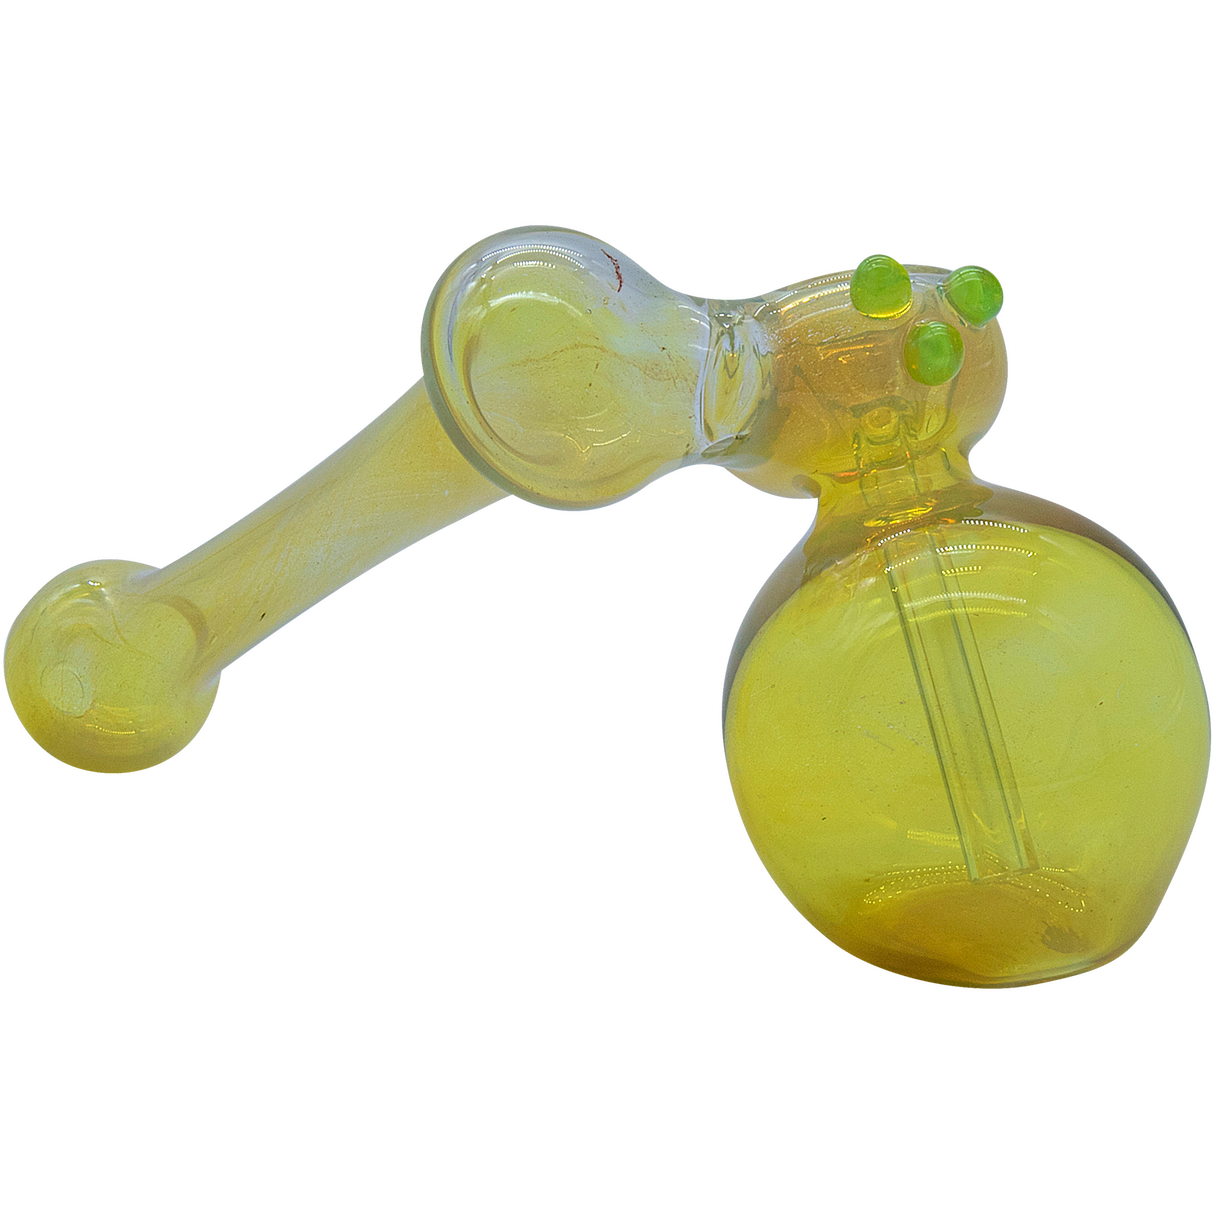 LA Pipes "Silver Sidecar" Fumed Hammer Sidecar Pipe in Green, 6" Borosilicate Glass, USA Made